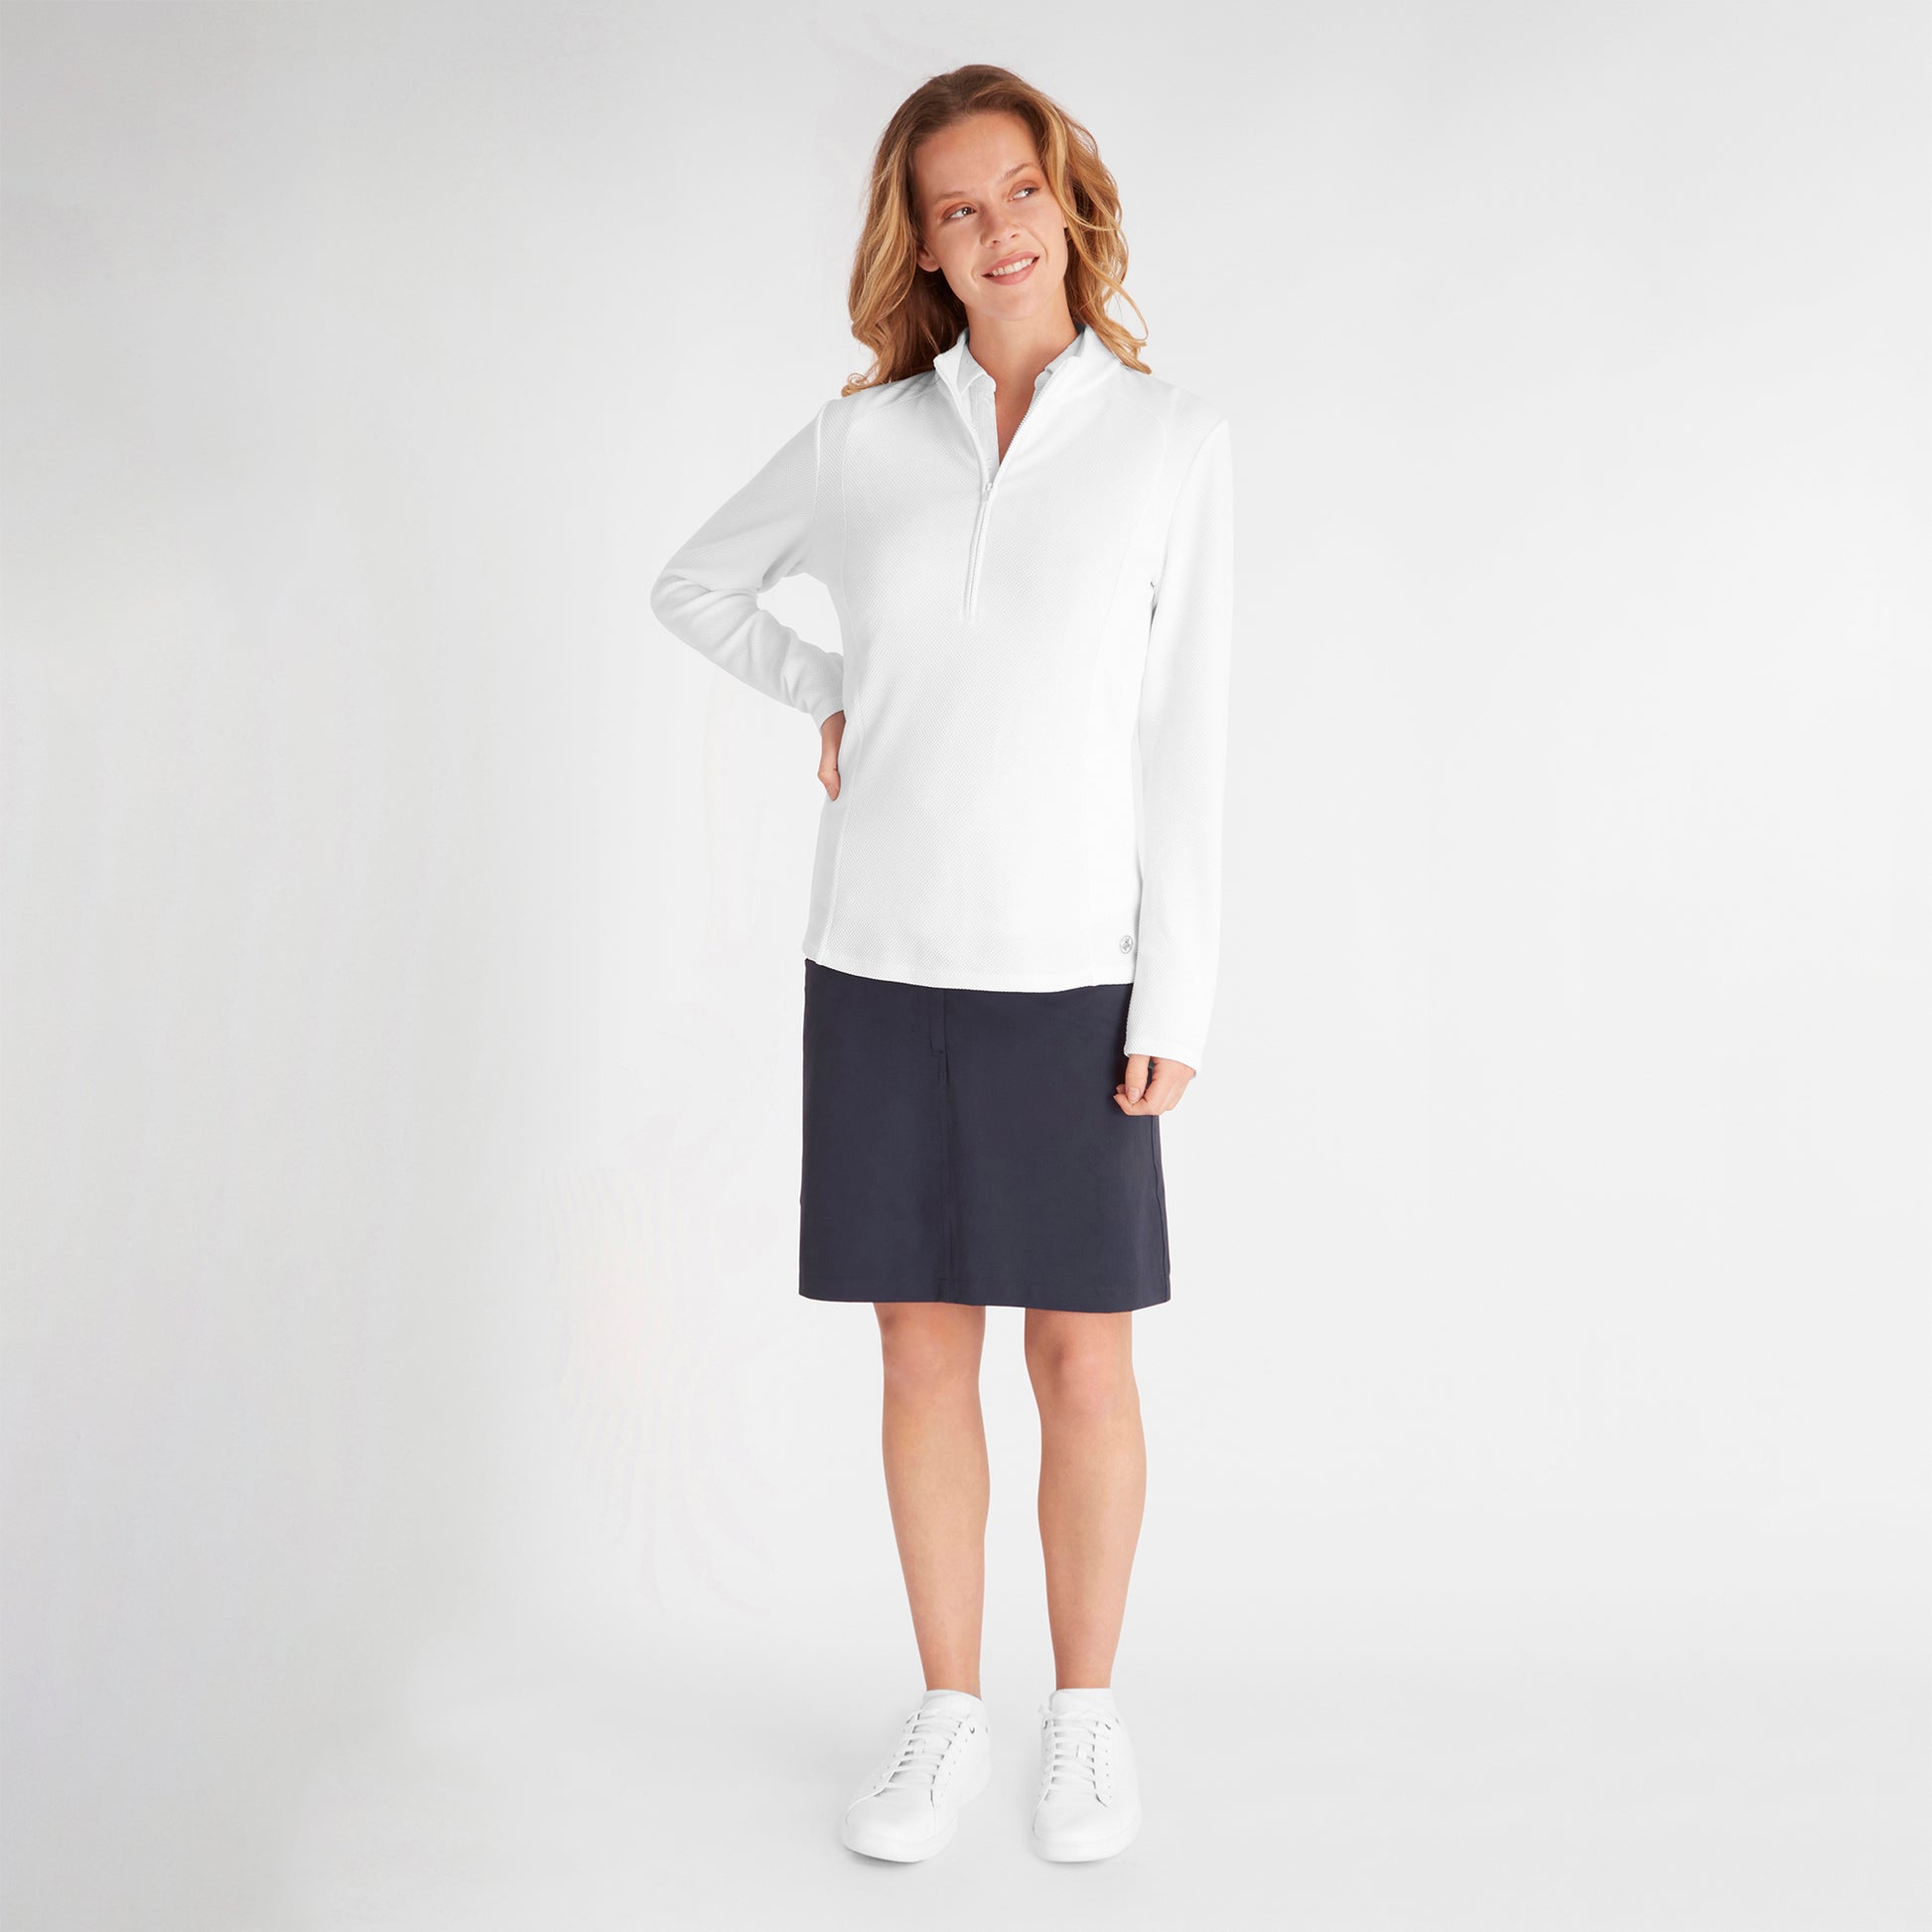 Green Lamb Women's Zip-Neck Golf Top with Waffle Design in White